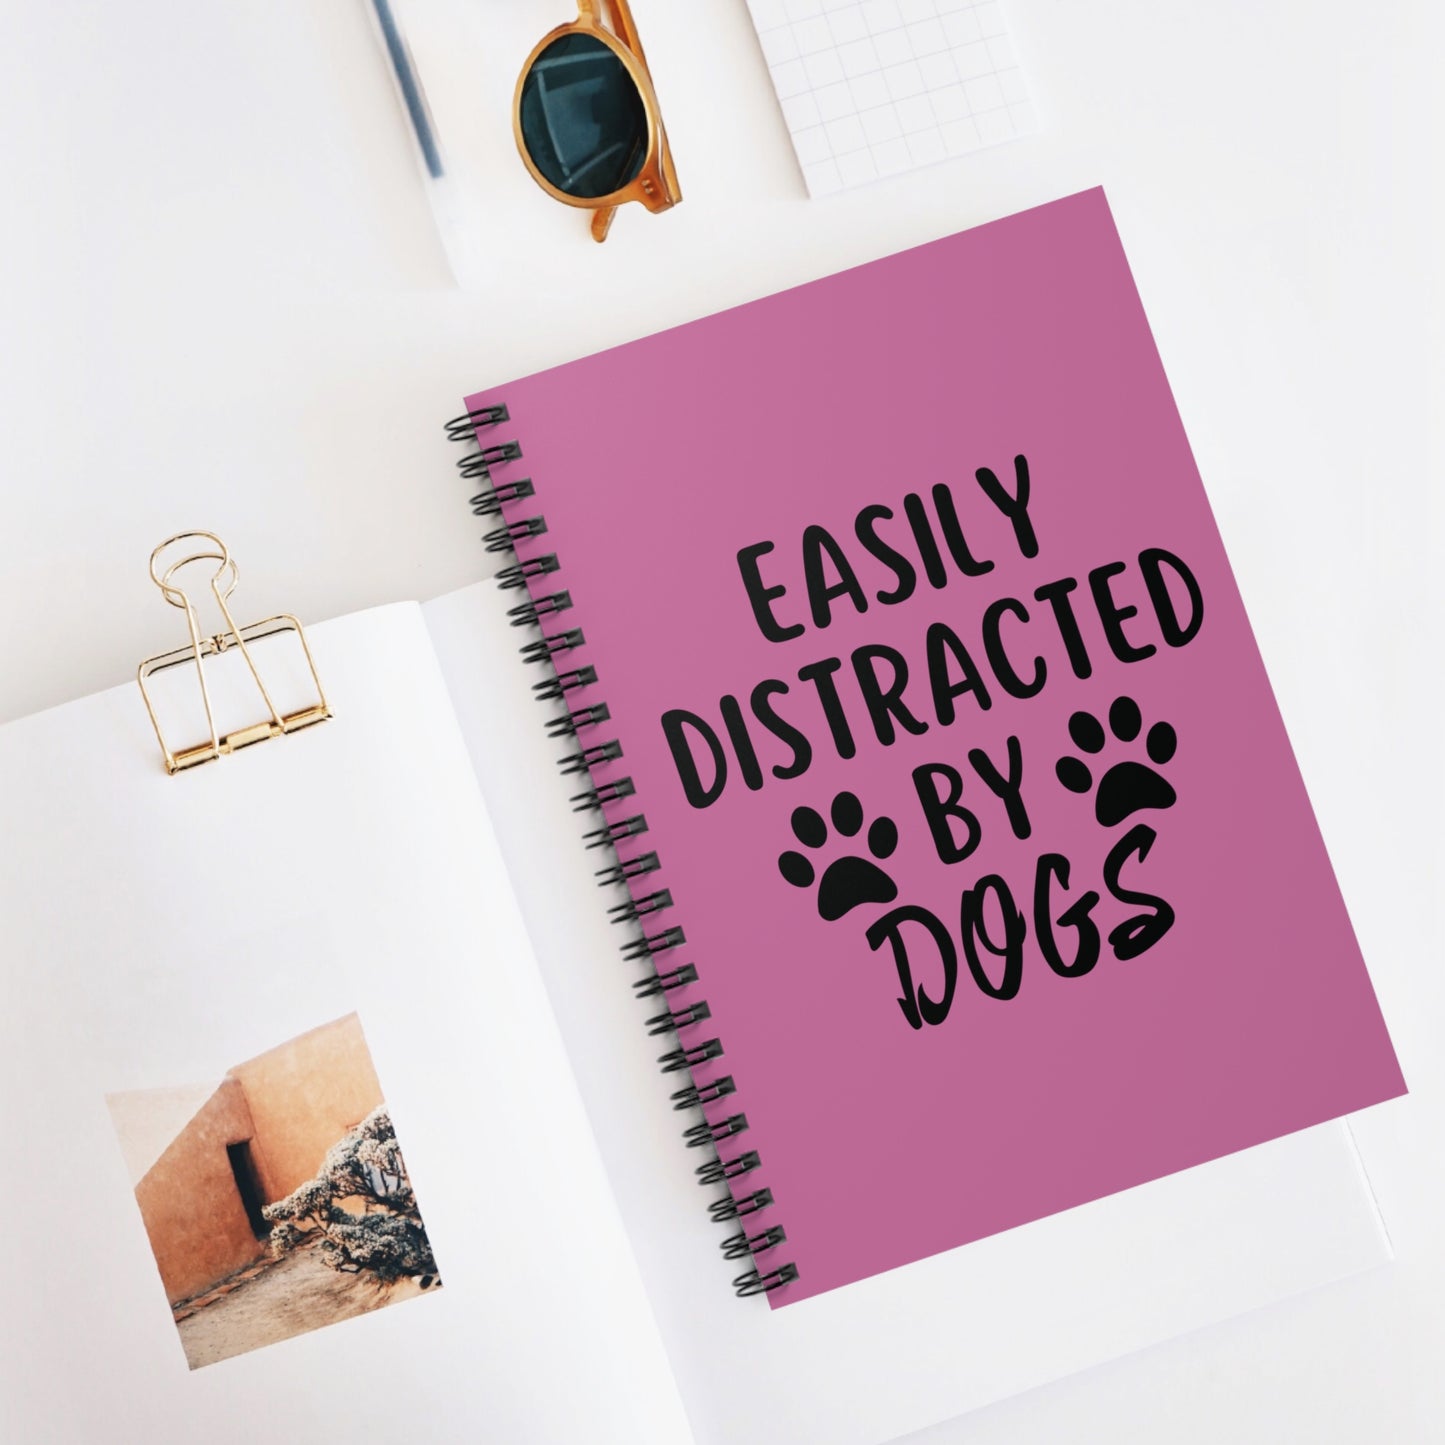 Easily Distracted By Dogs - Spiral Notebook - Ruled Line